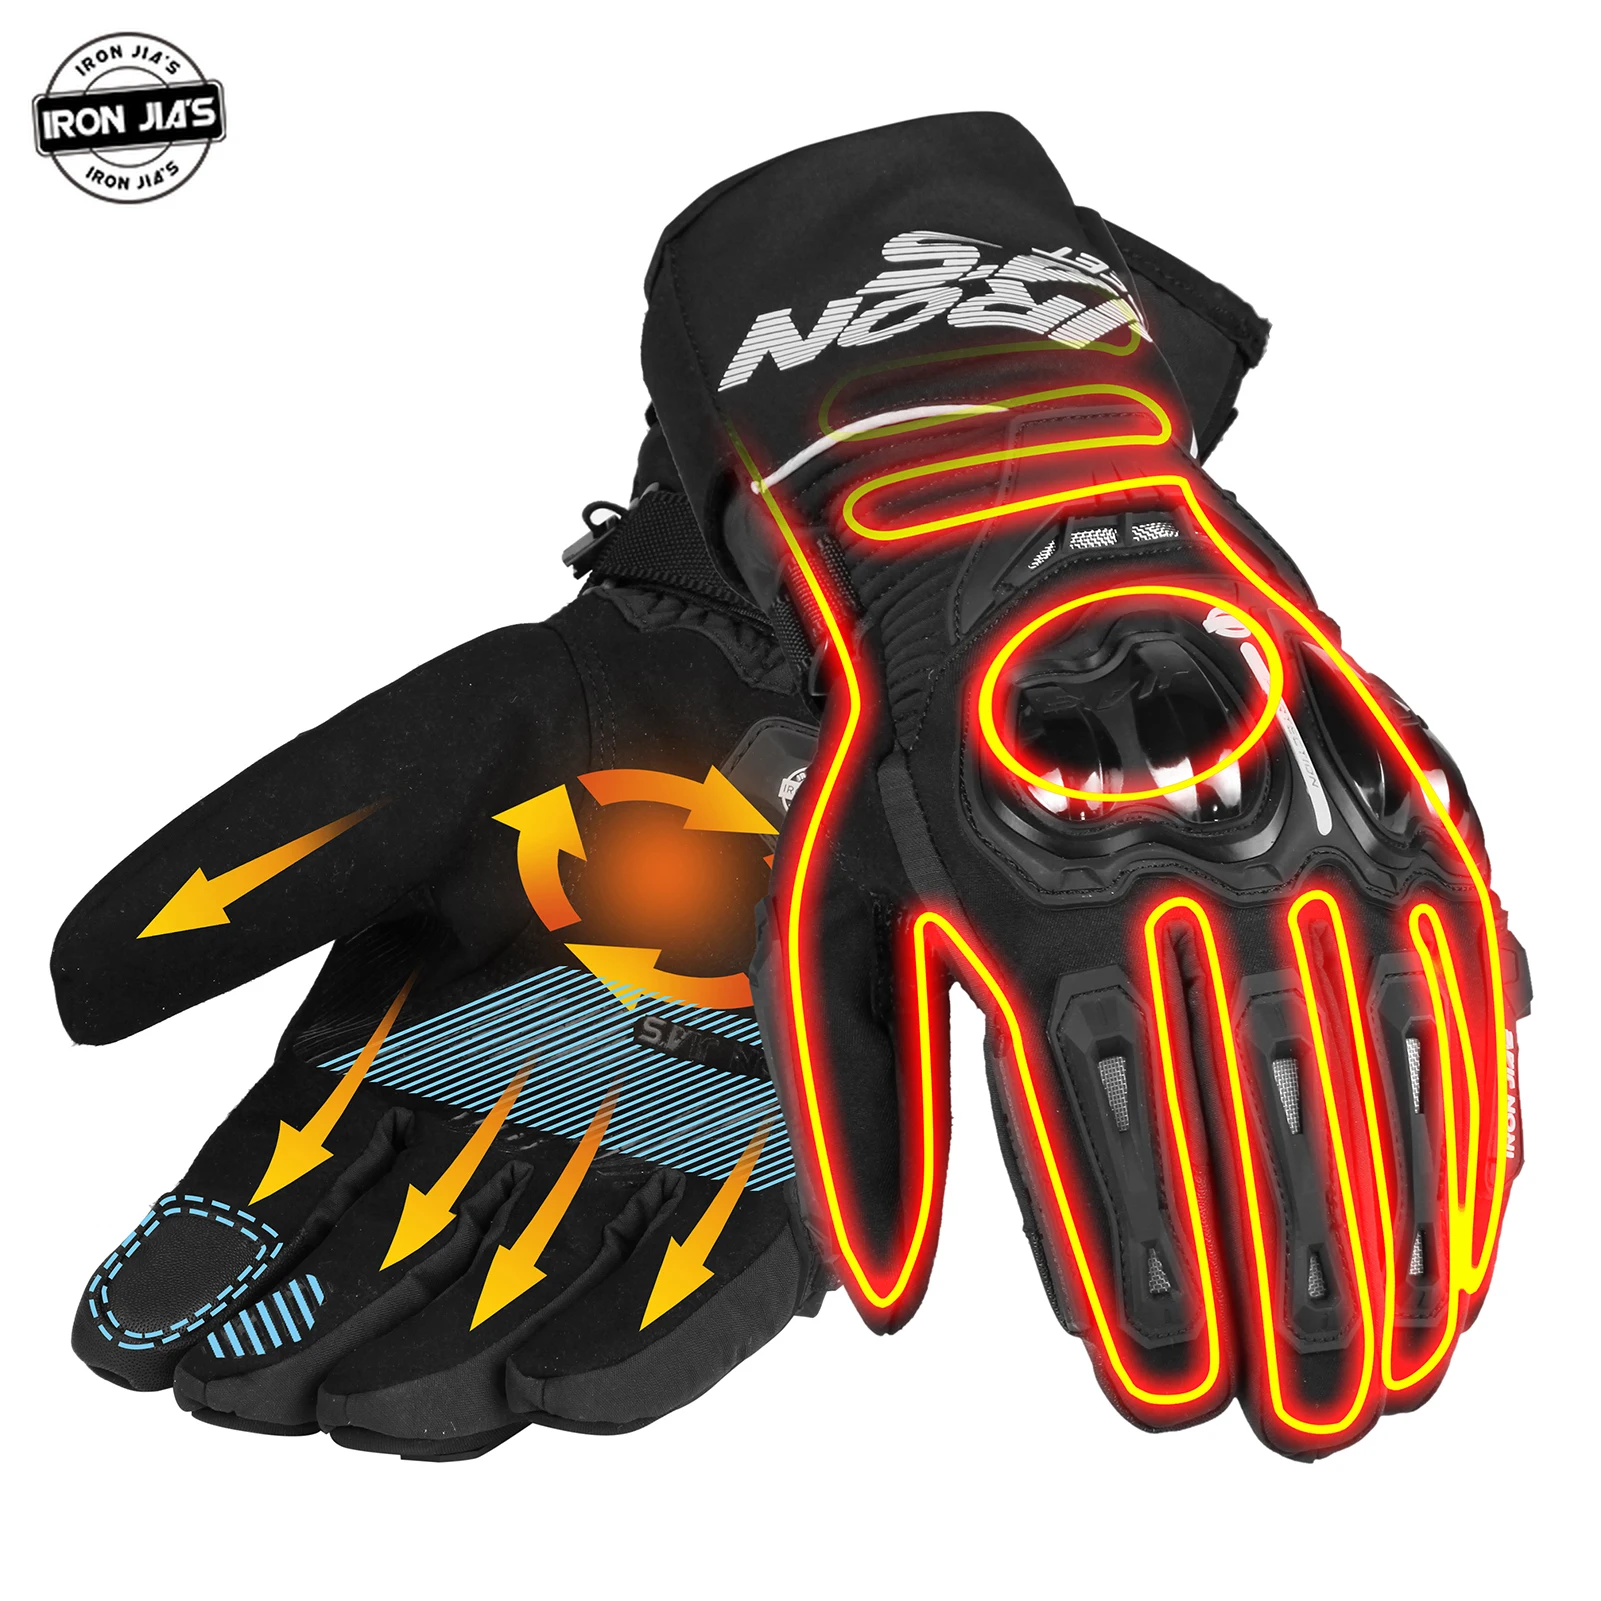 IRON JIA'S Heating Motorcycle Gloves Touch Screen Winter Moto Heated 12V Vehicle Battery Powered Gloves Snowboarding Motorbike enlarge